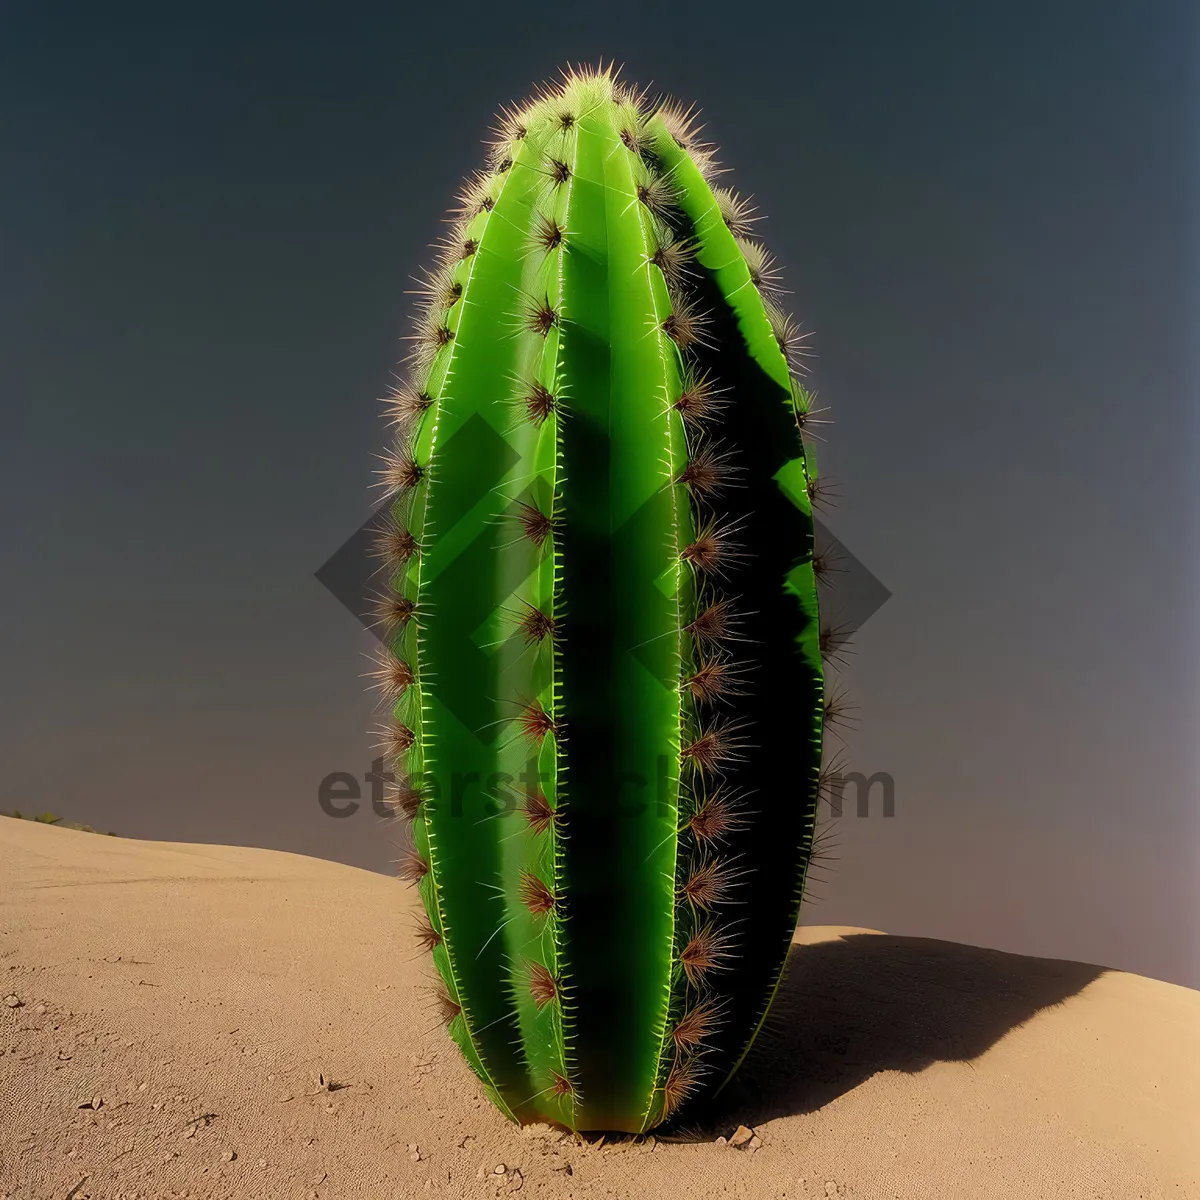 Picture of Closeup View of Aloe Leaf: Cactus Plant Botany